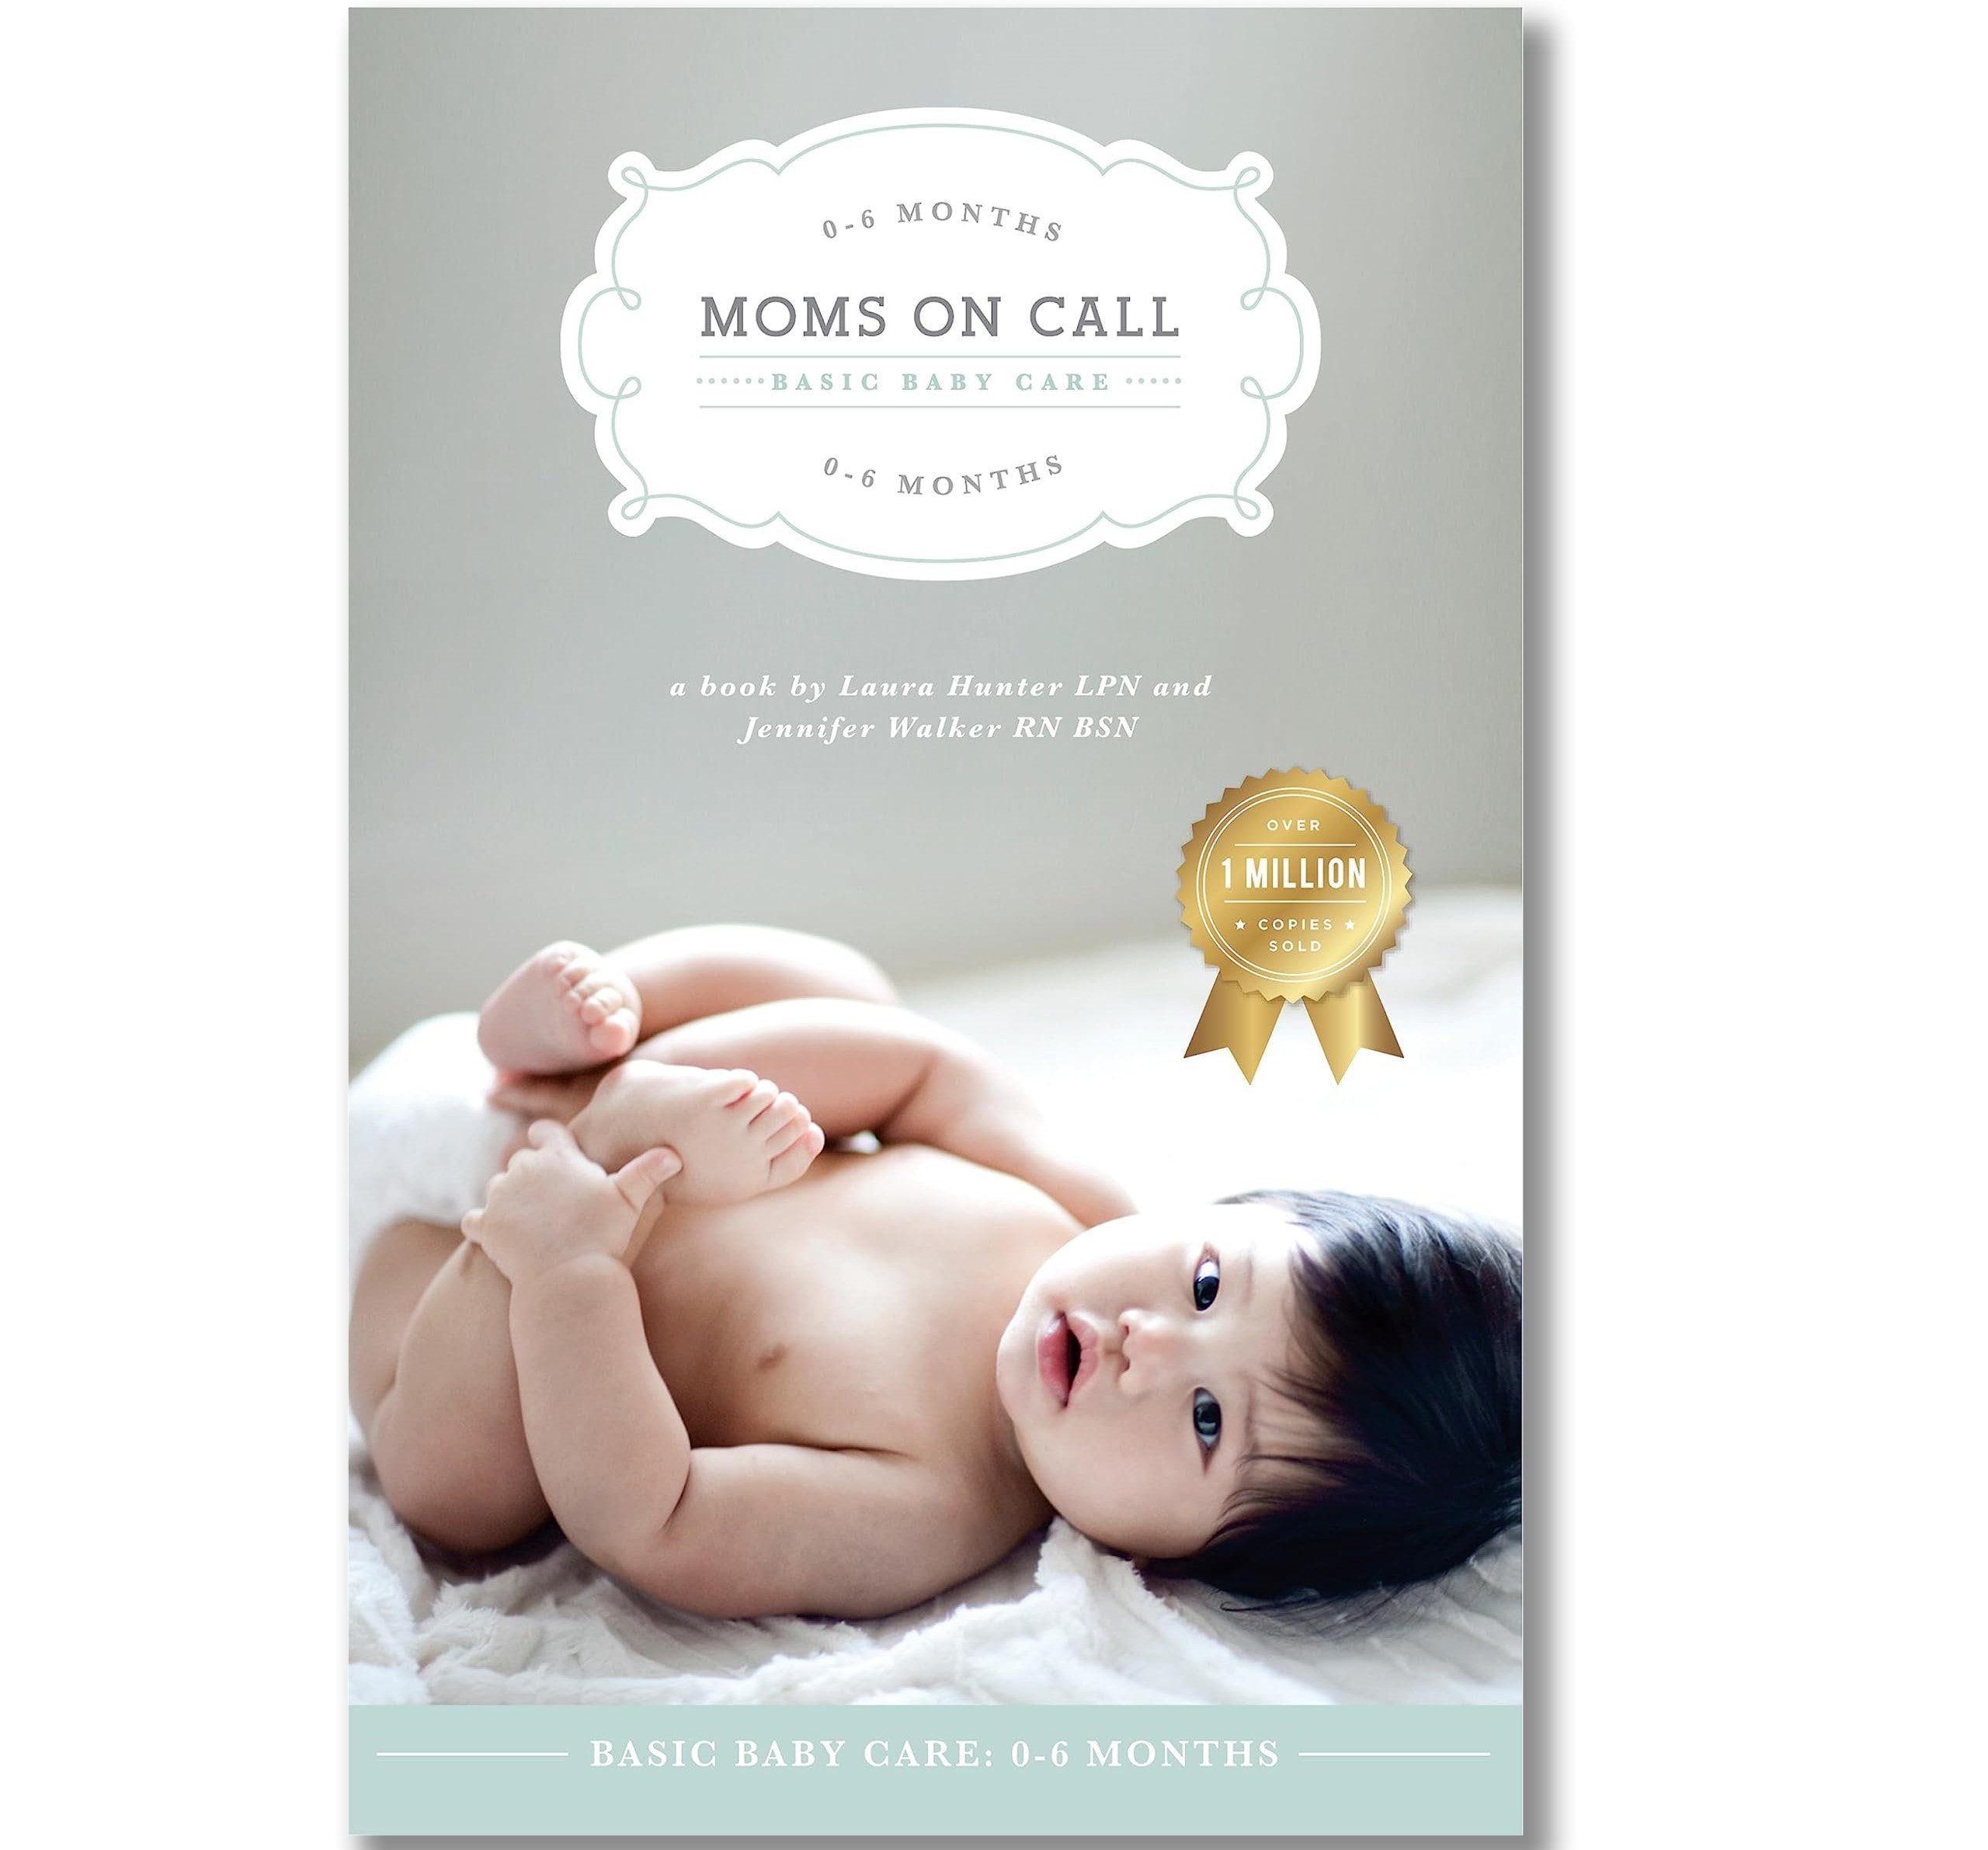 "Moms on Call | Basic Baby Care 0-6 Months" by  Laura Hunter, L.P.N., and Jennifer Walker, R.N., B.S.N.